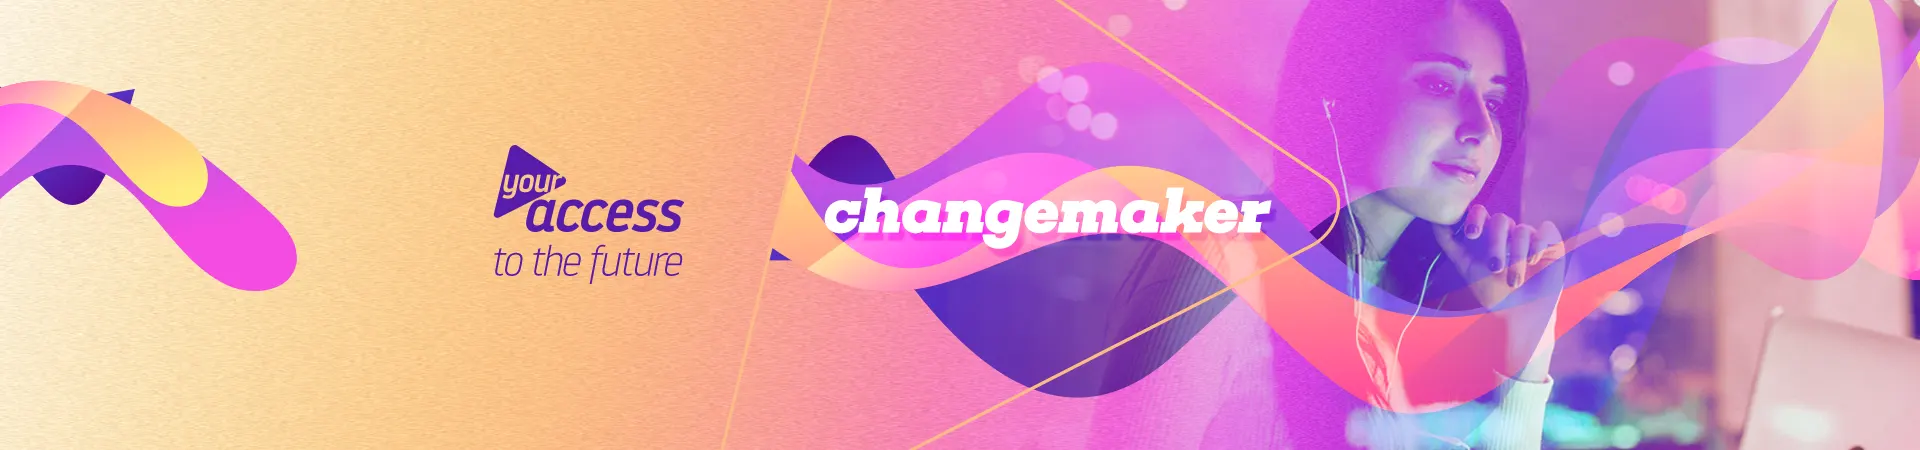 YourAcces to the Future - Changemaker